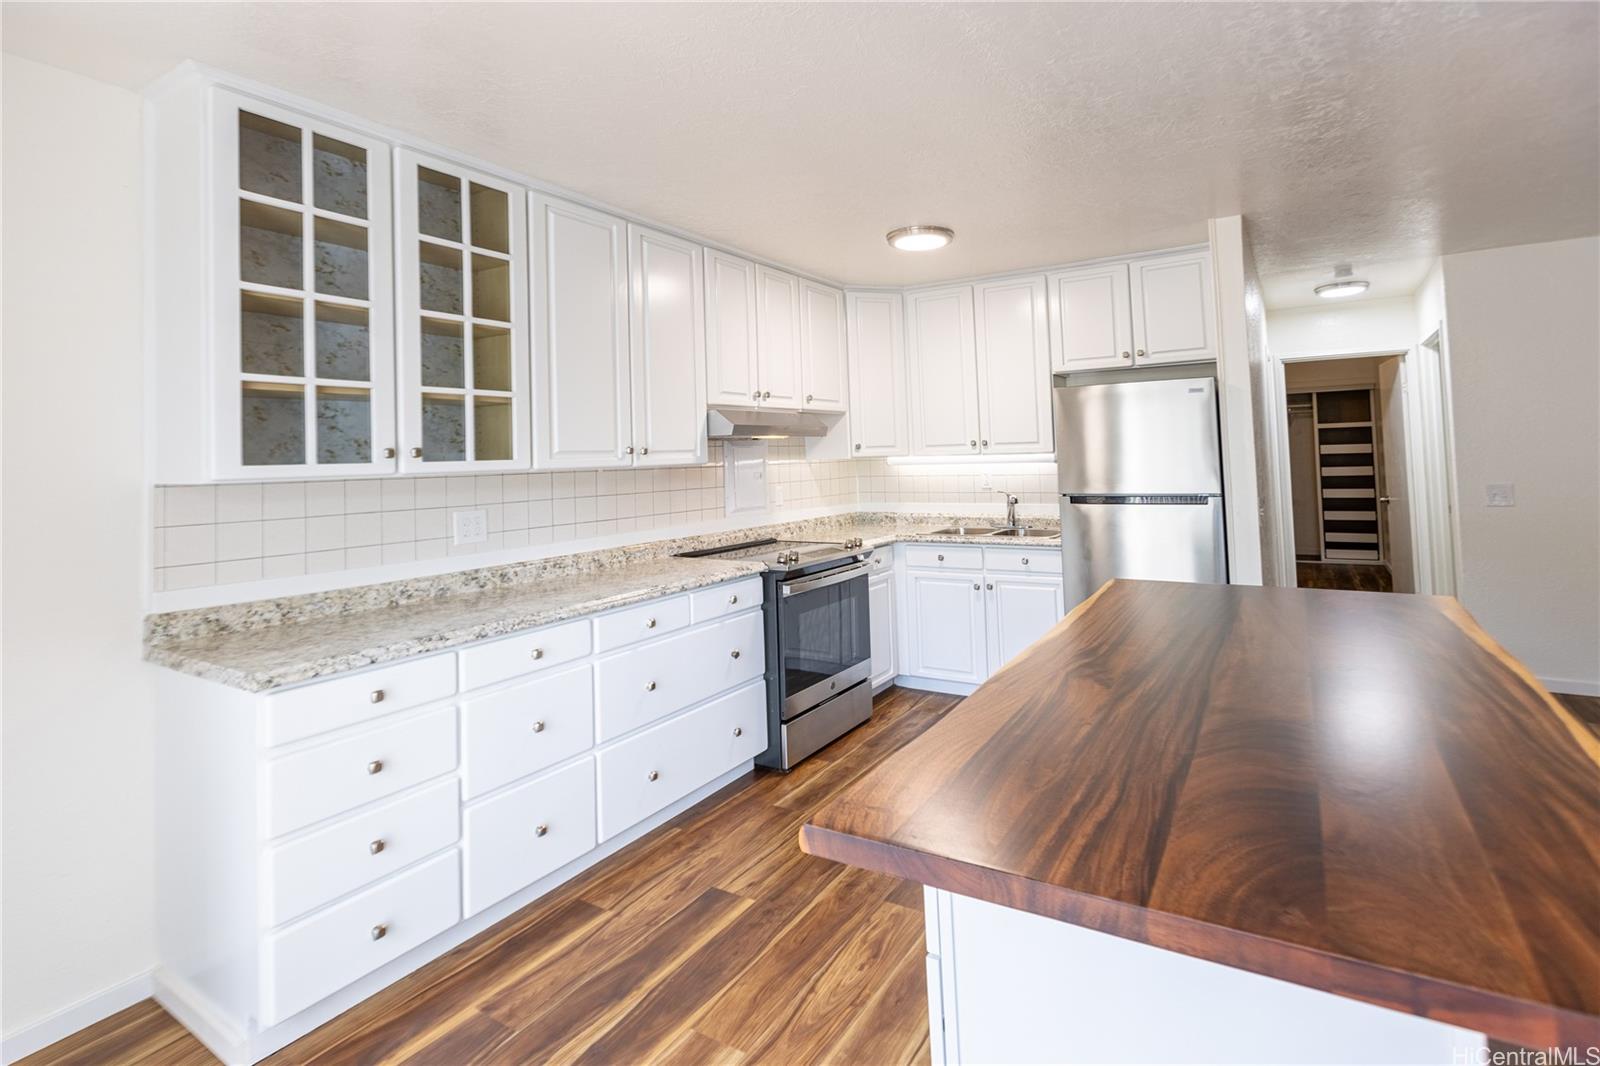 a kitchen with stainless steel appliances granite countertop a stove a sink and white cabinets with wooden floor